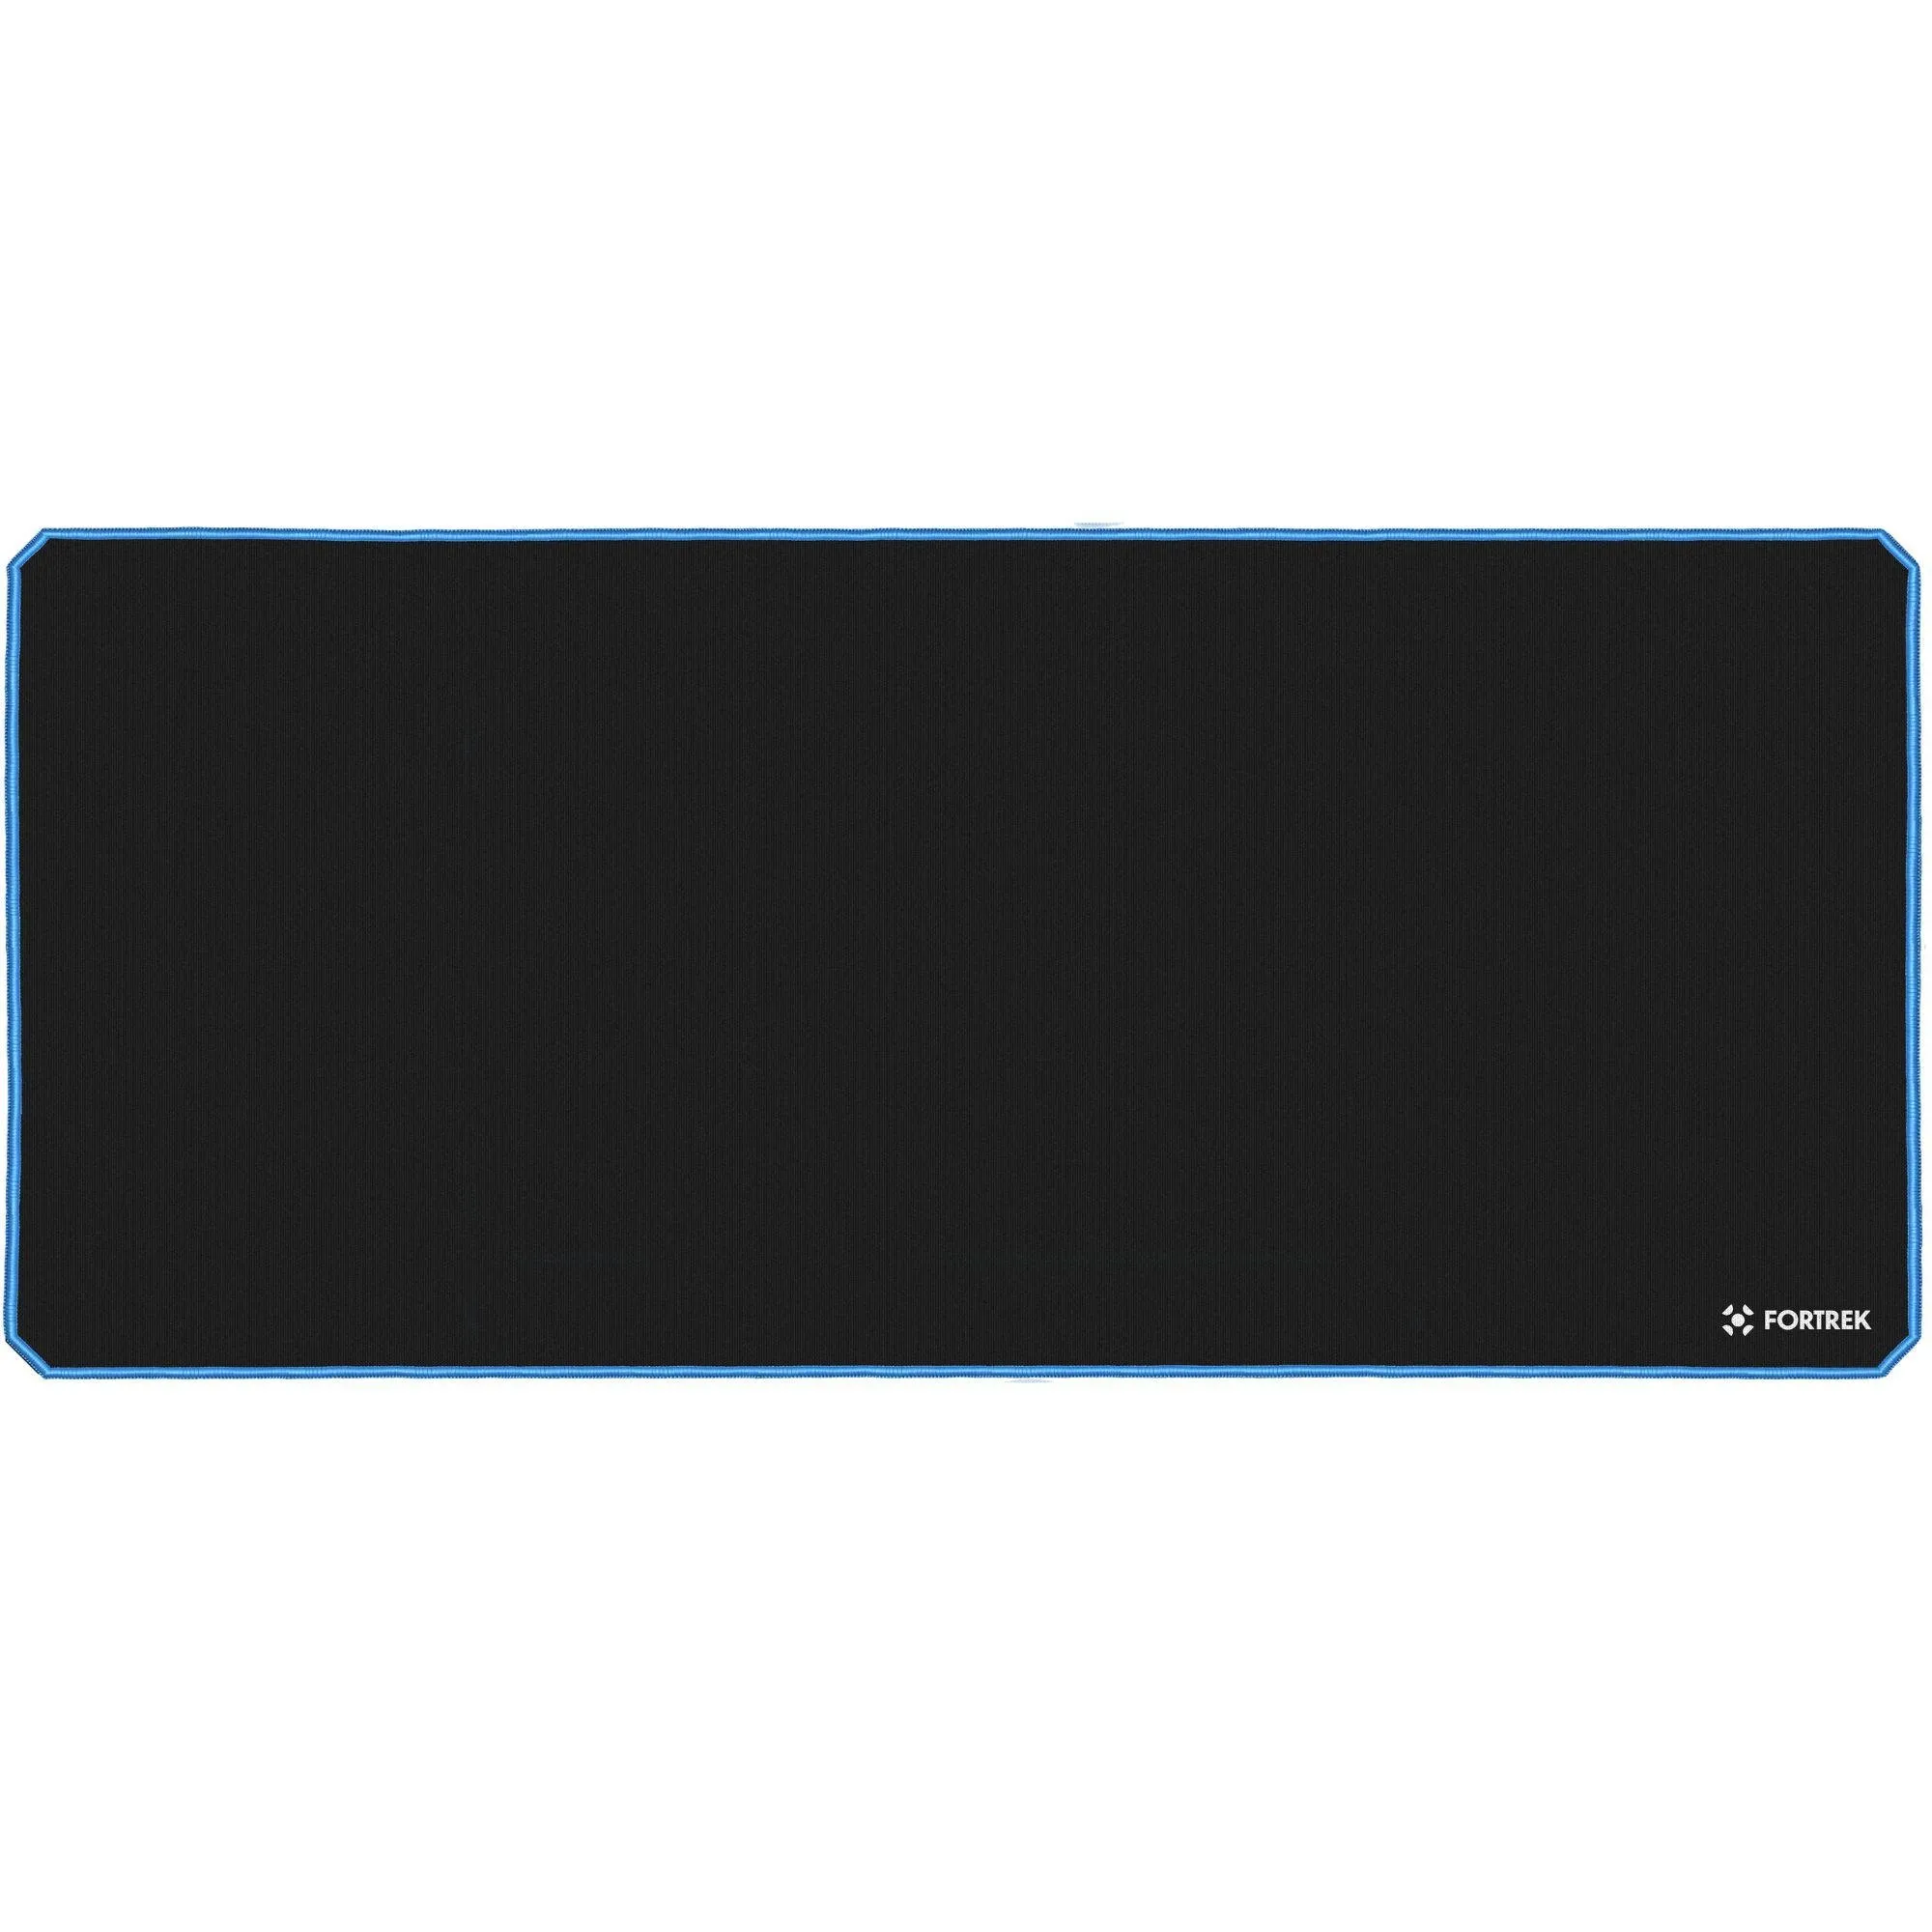 Mouse Pad Gamer Fortrek Speed MPG104 (900x400mm) Azul (77540)